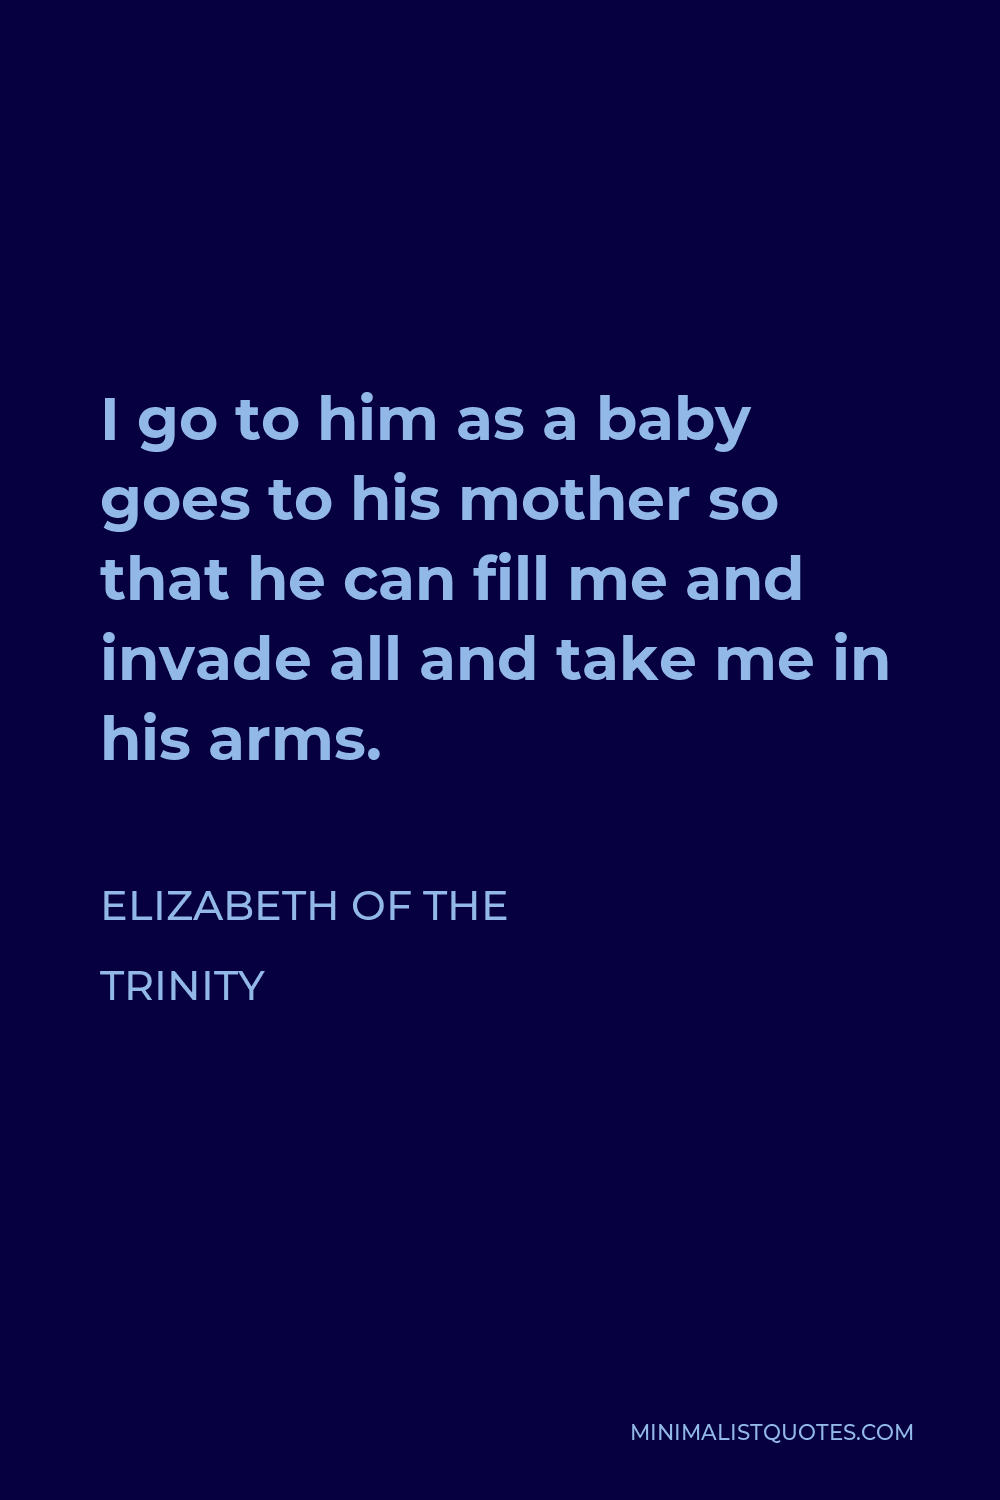 Elizabeth of the Trinity Quote - I go to him as a baby goes to his mother so that he can fill me and invade all and take me in his arms.